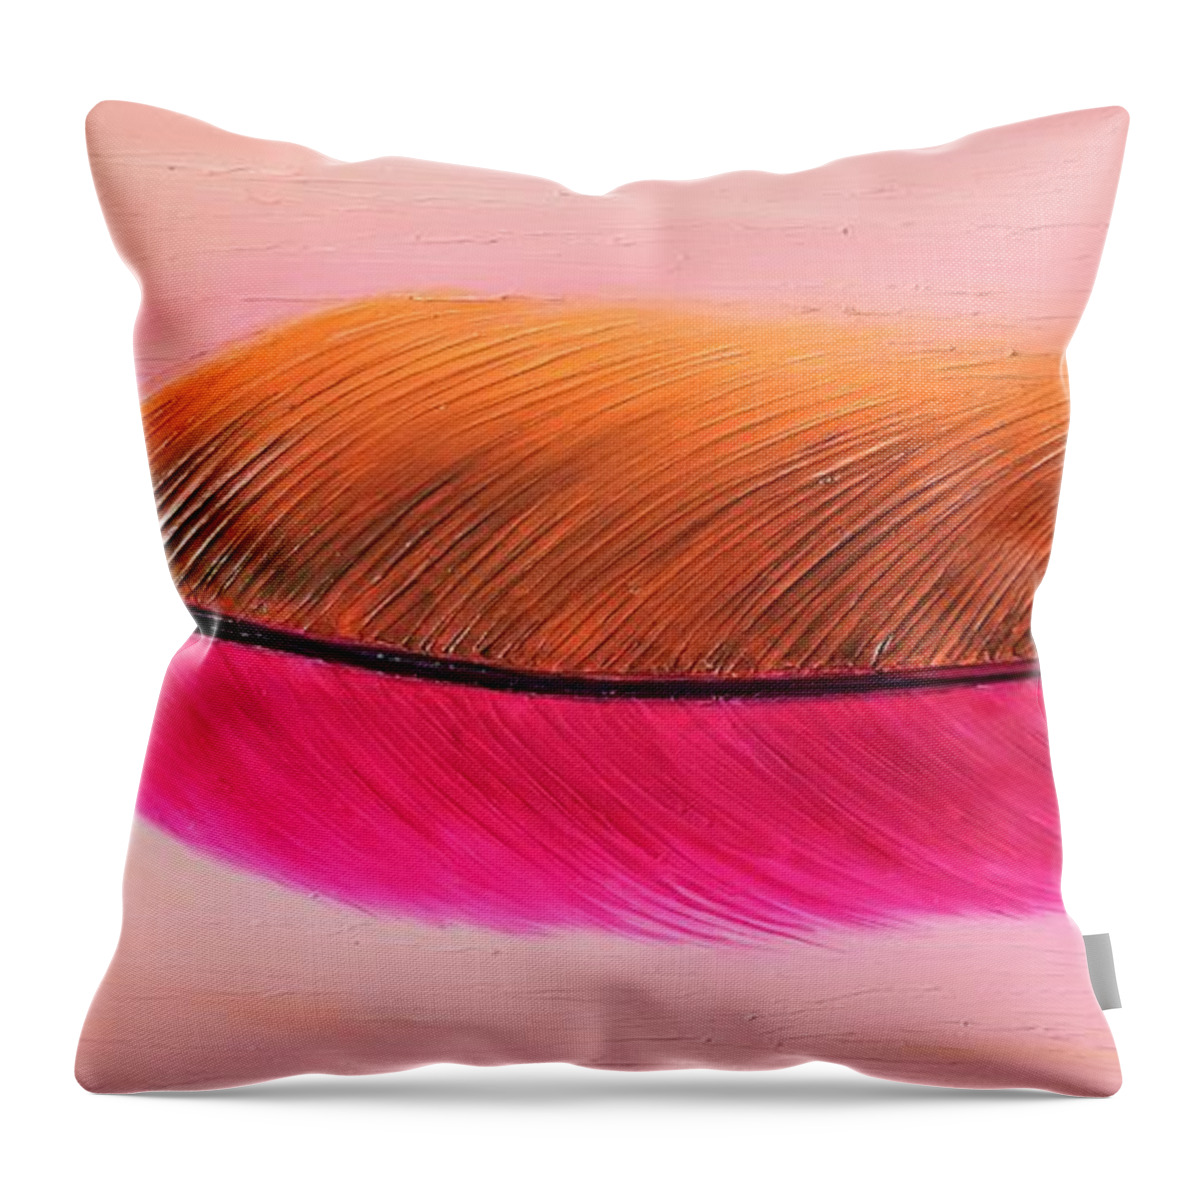 Feather Painting Throw Pillow featuring the painting Blushing Phase by Preethi Mathialagan